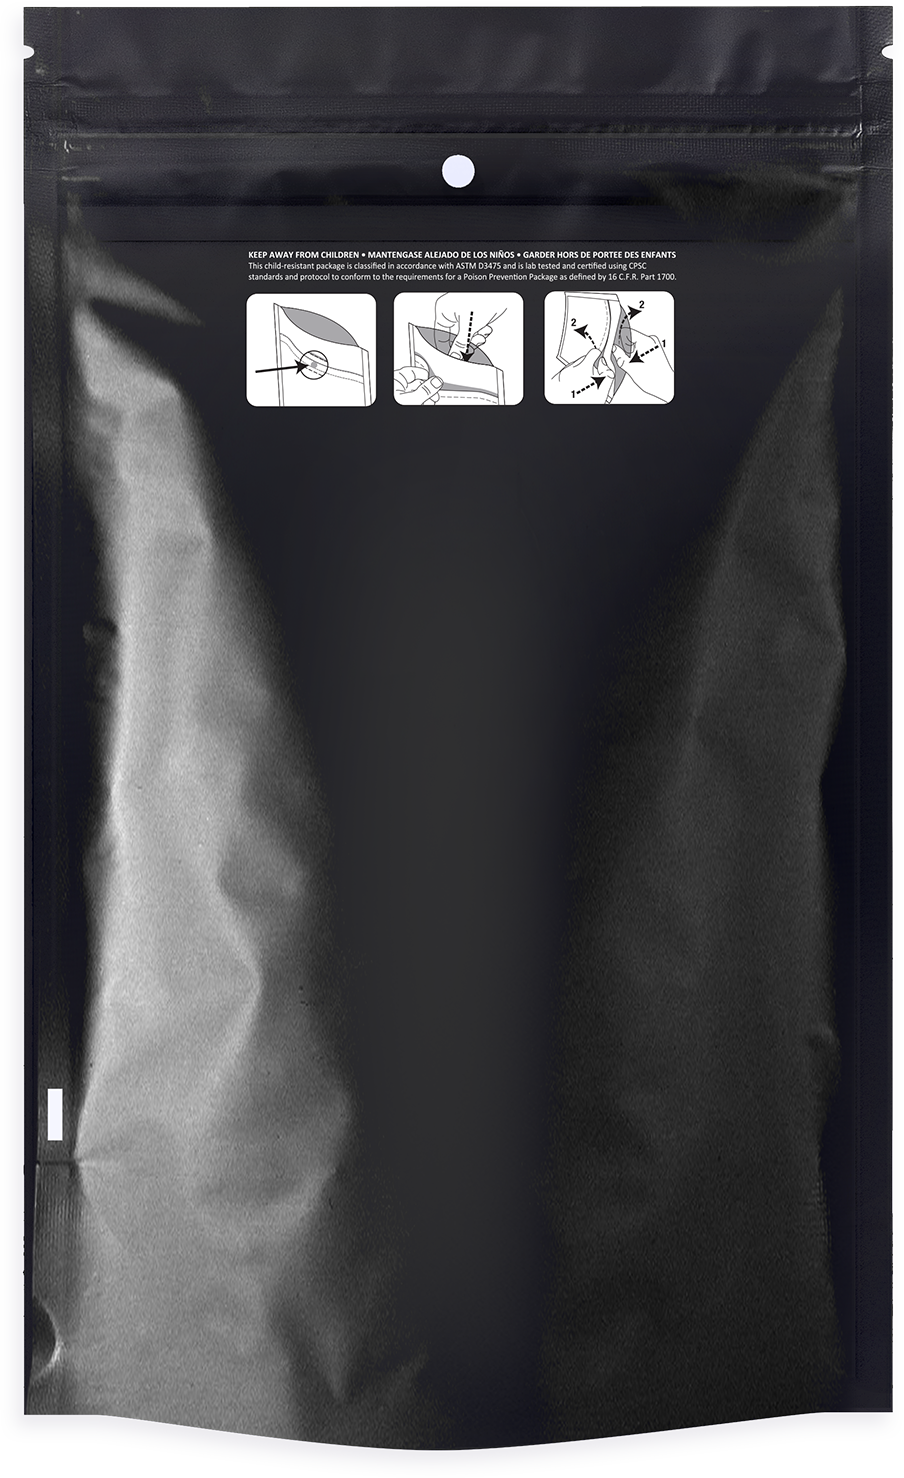 Black Child Resistant Pouch 28g or 1oz capacity